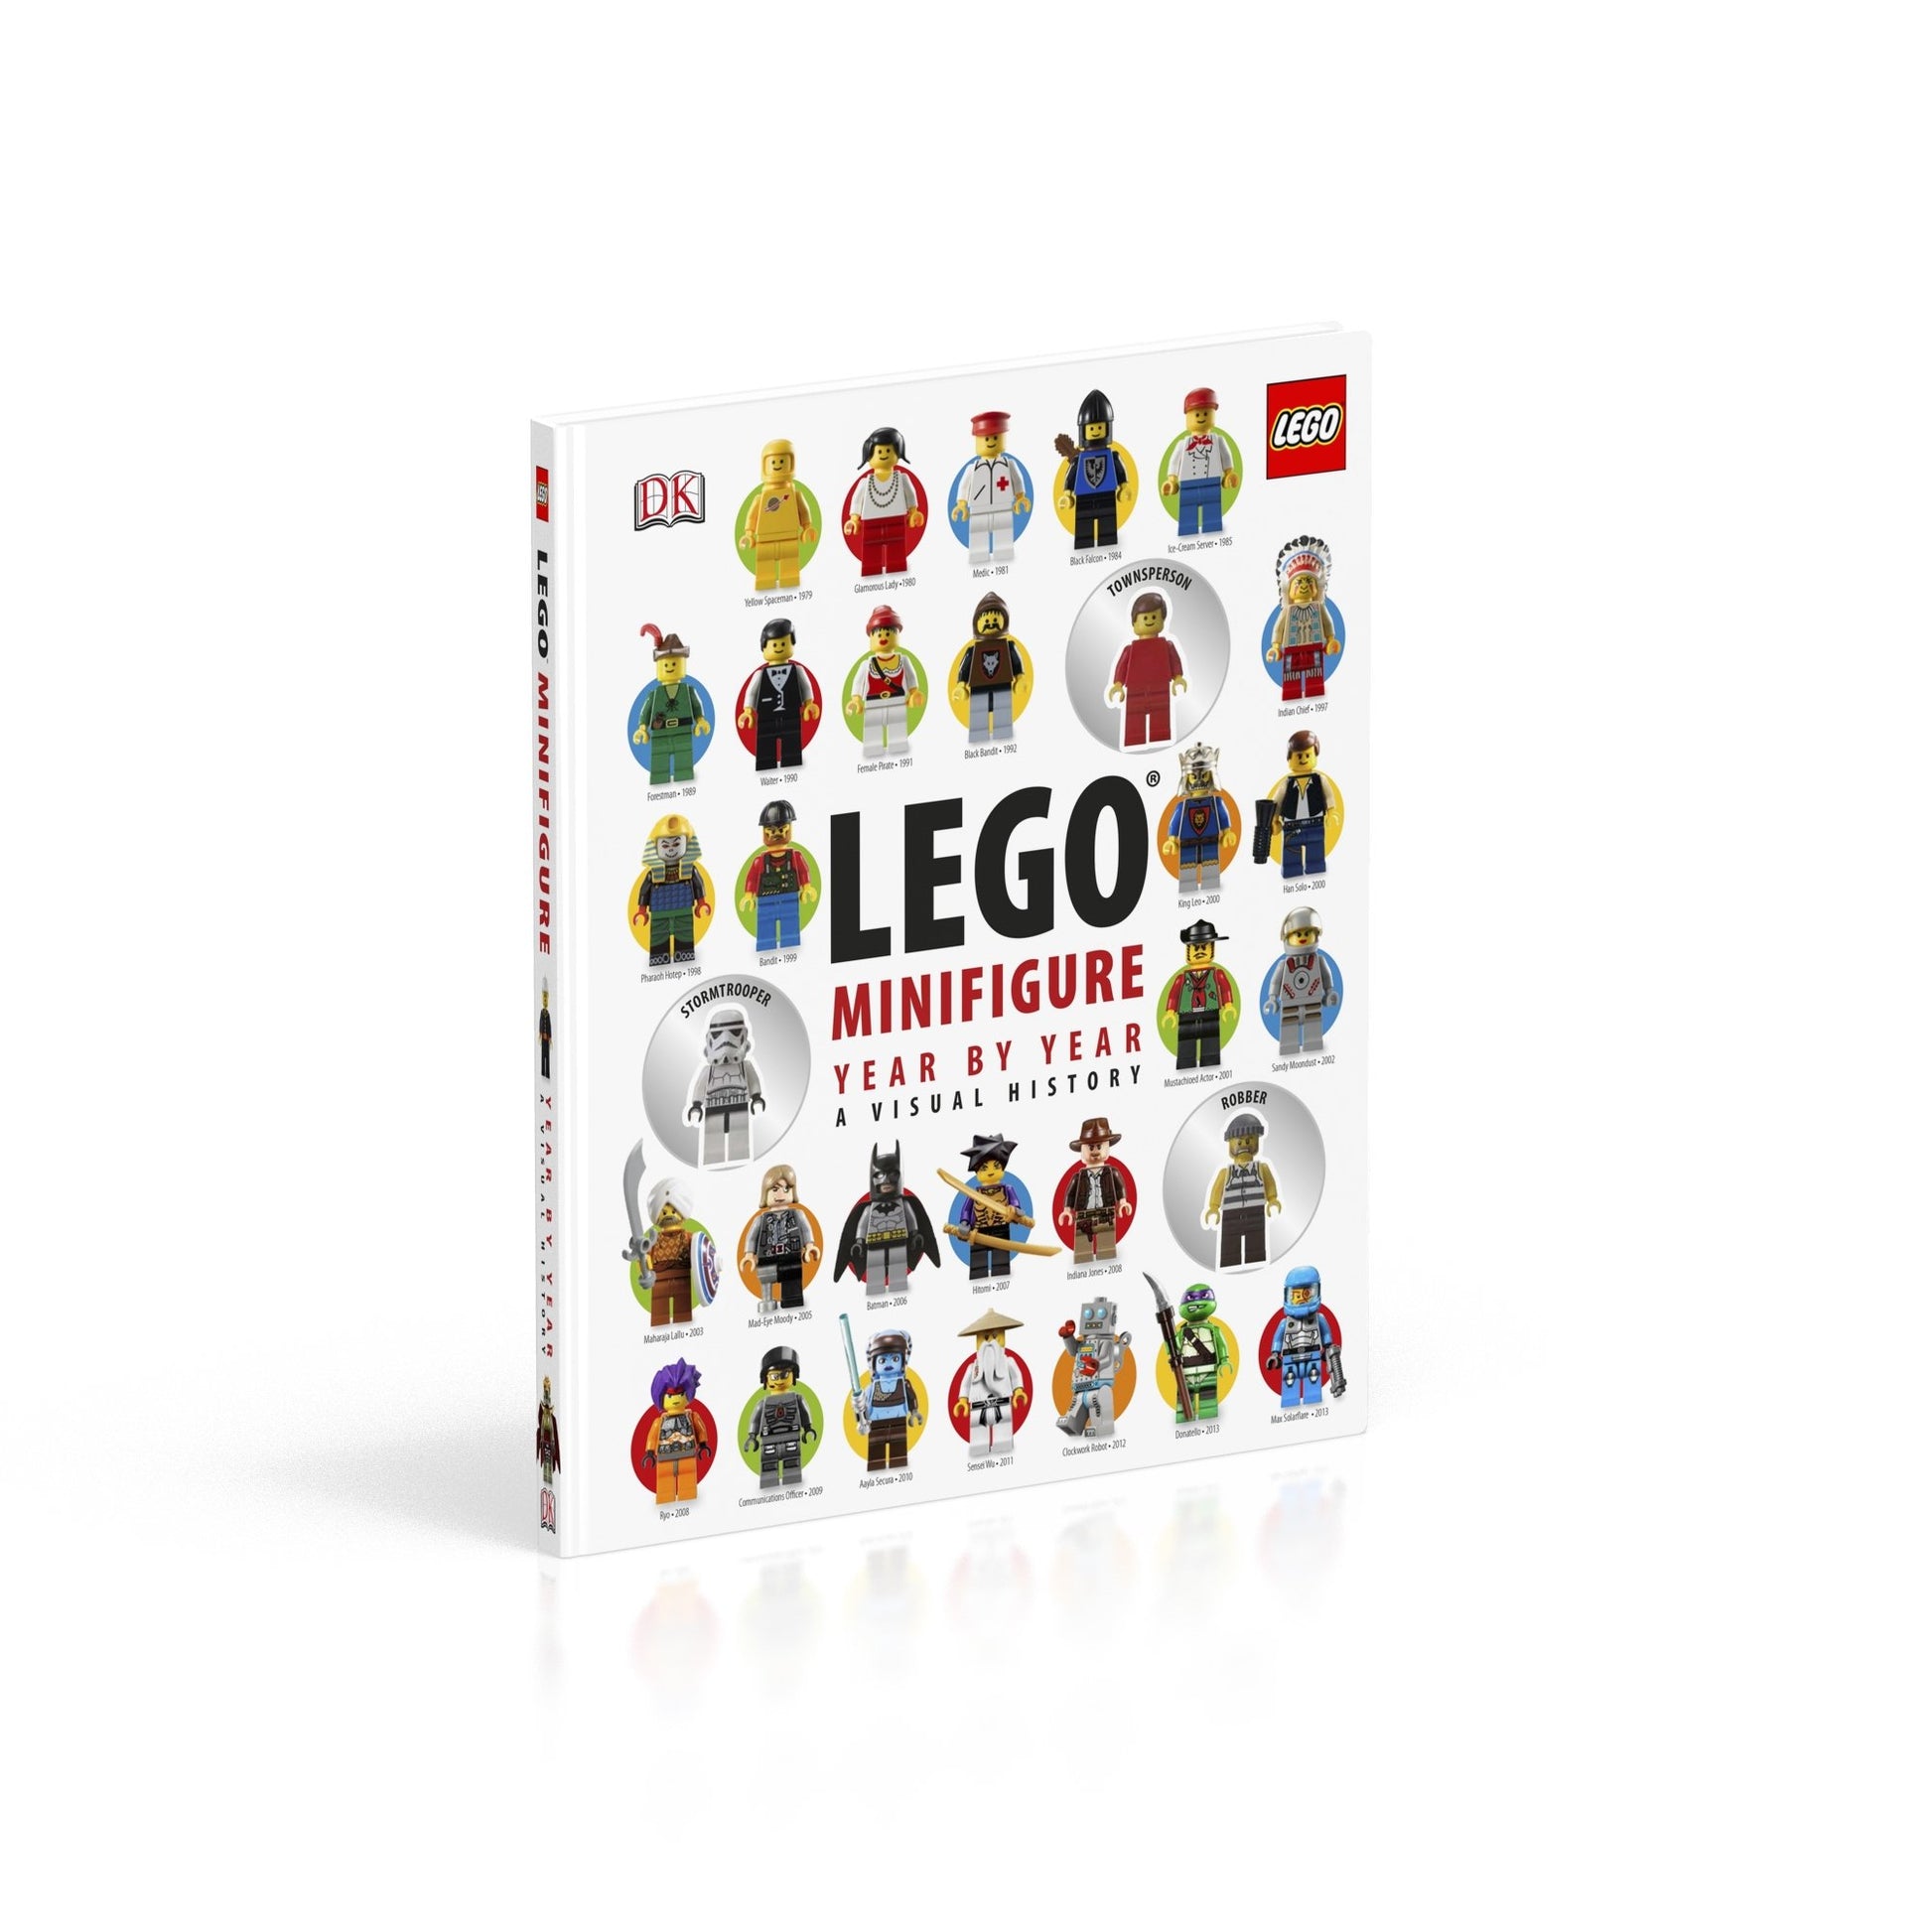 LEGO Minifigure Year by Year: Visual History – Seven